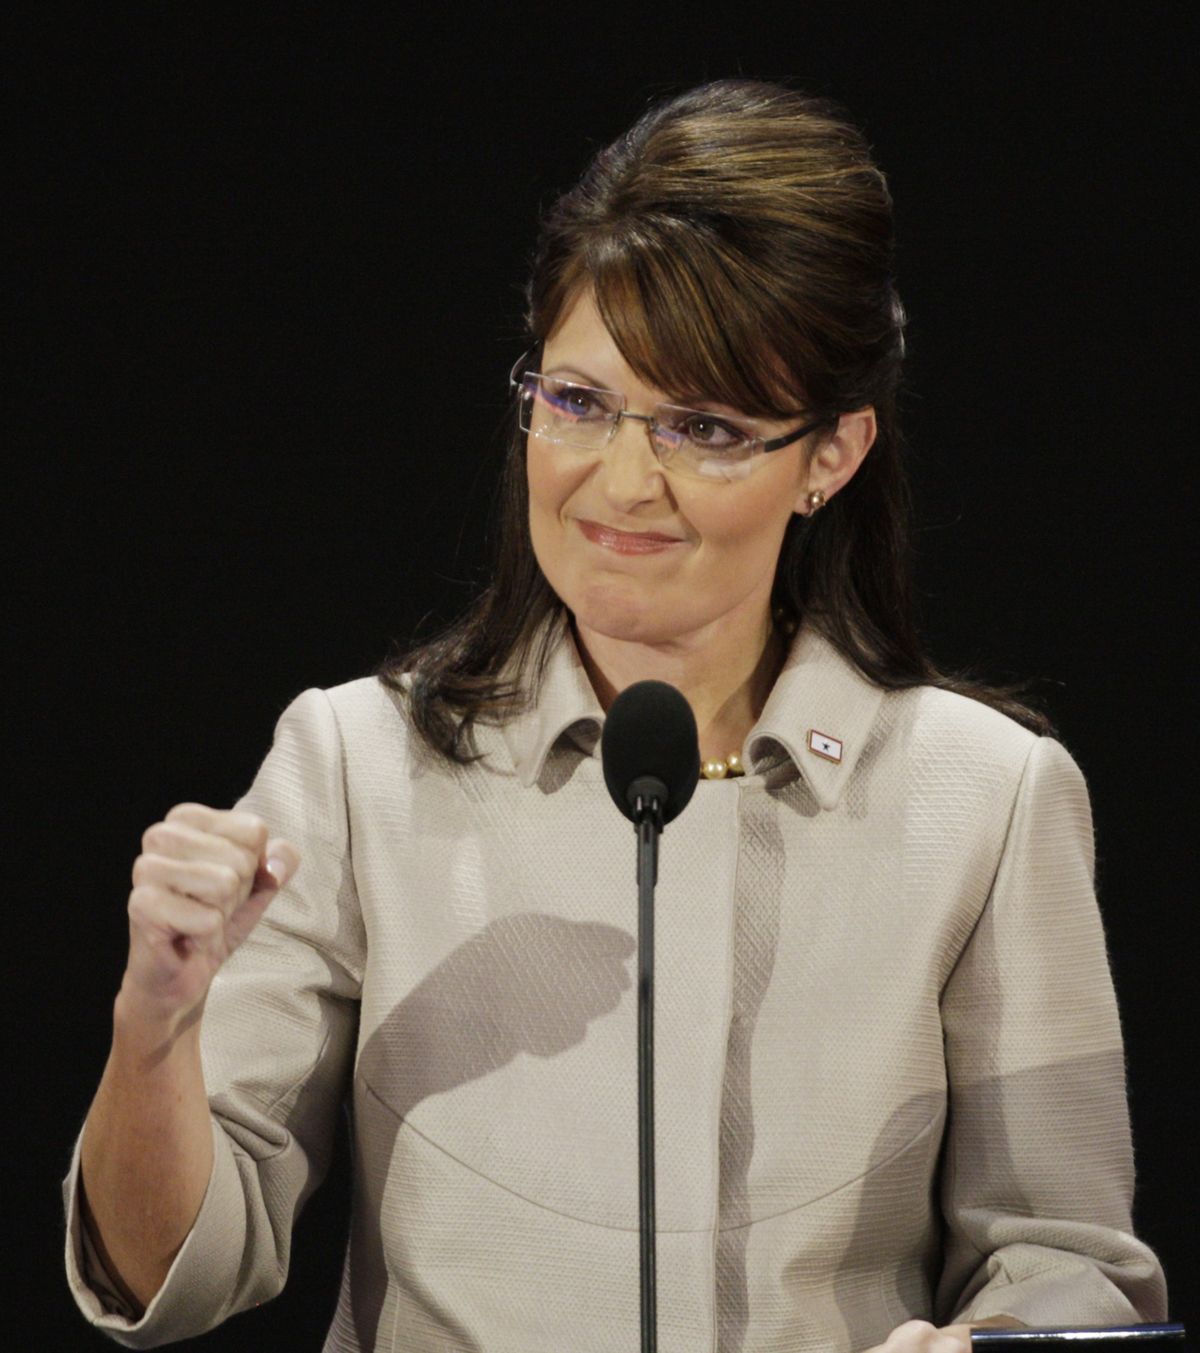 Republican vice presidential candidate Sarah Palin pumps her fist during her speech Wednesday at the Republican National Convention in St. Paul, Minn. Associated Press photos (Associated Press photos / The Spokesman-Review)